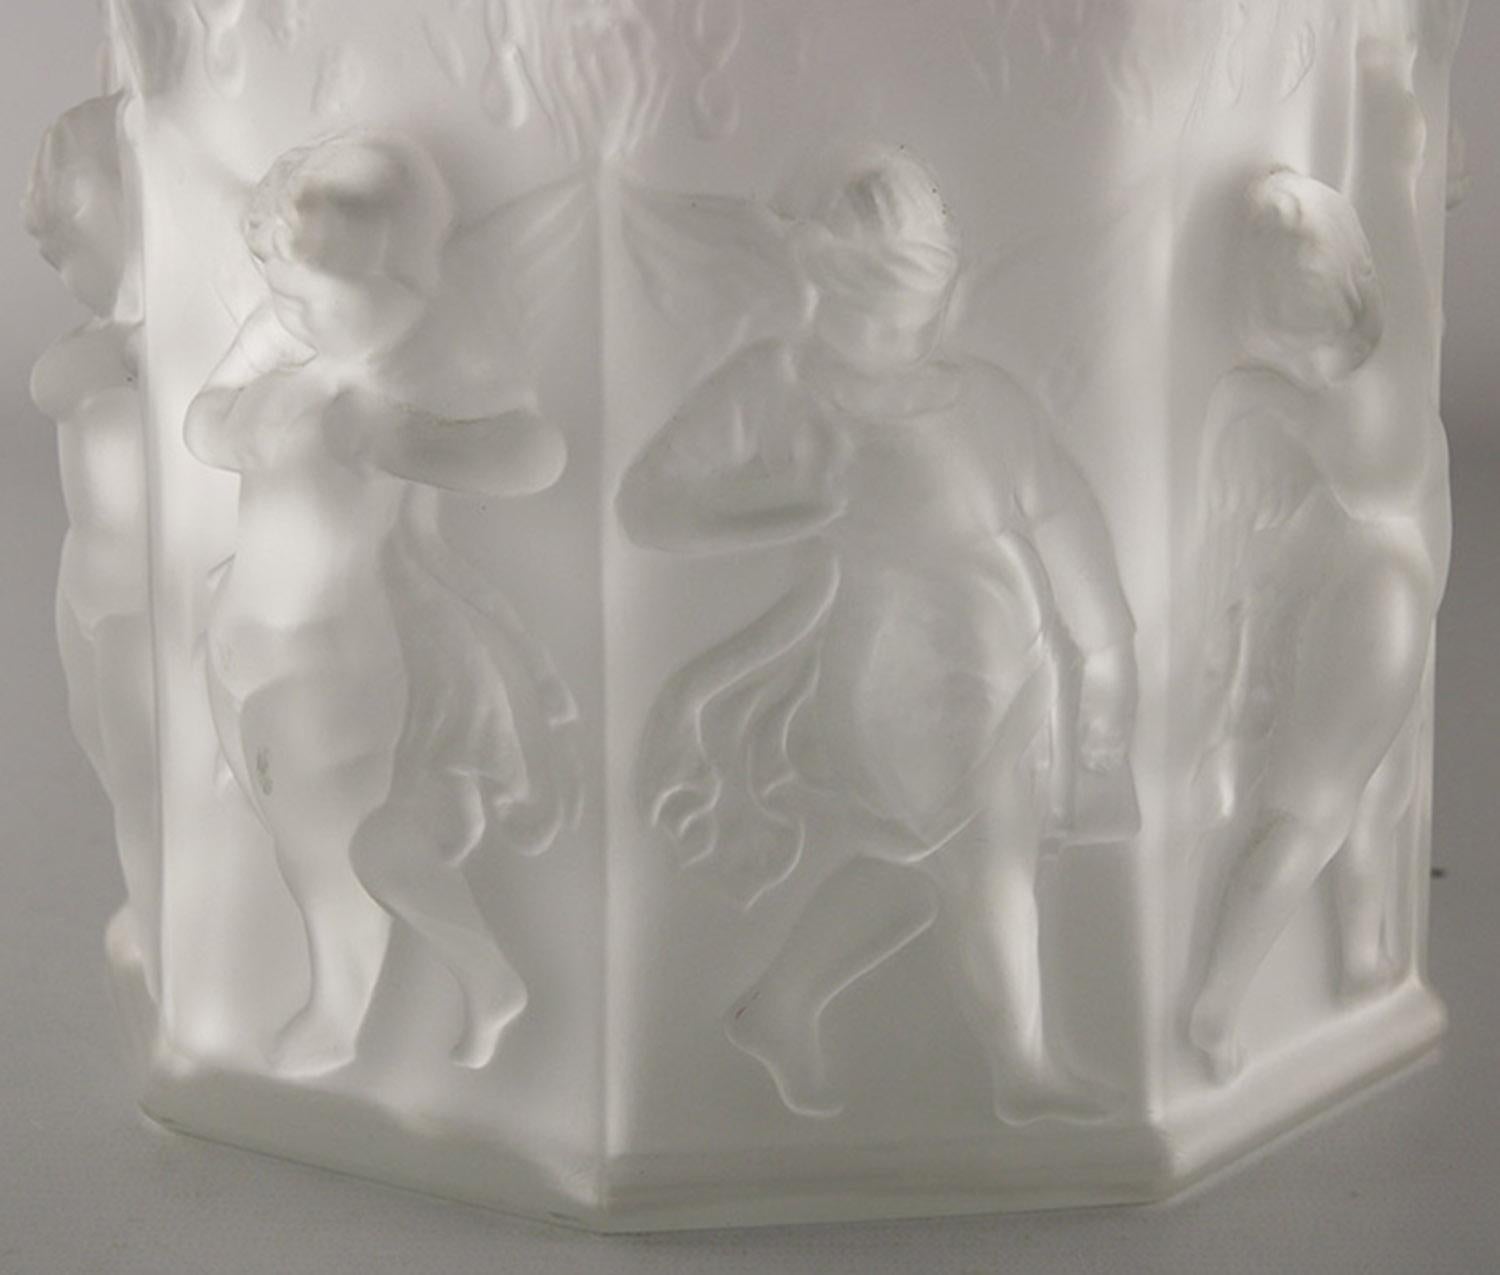 20th Century Early 20th C. French Octagonal Frosted Glass Vase Centerpiece with Cherubs For Sale